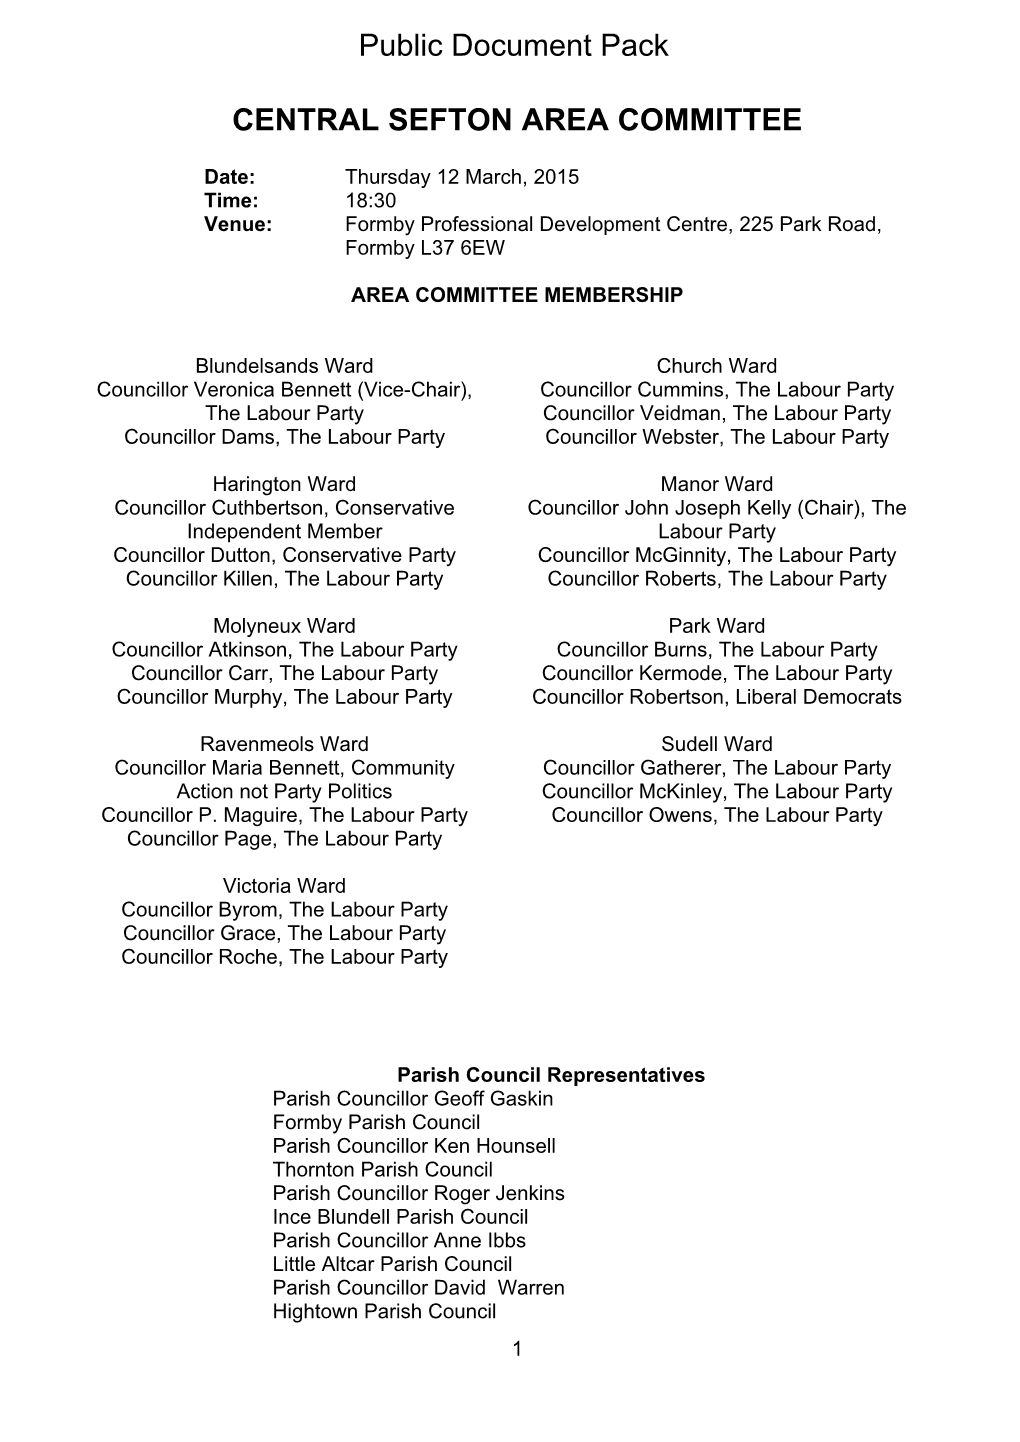 (Public Pack)Agenda Document for Central Sefton Area Committee, 12/03/2015 18:30